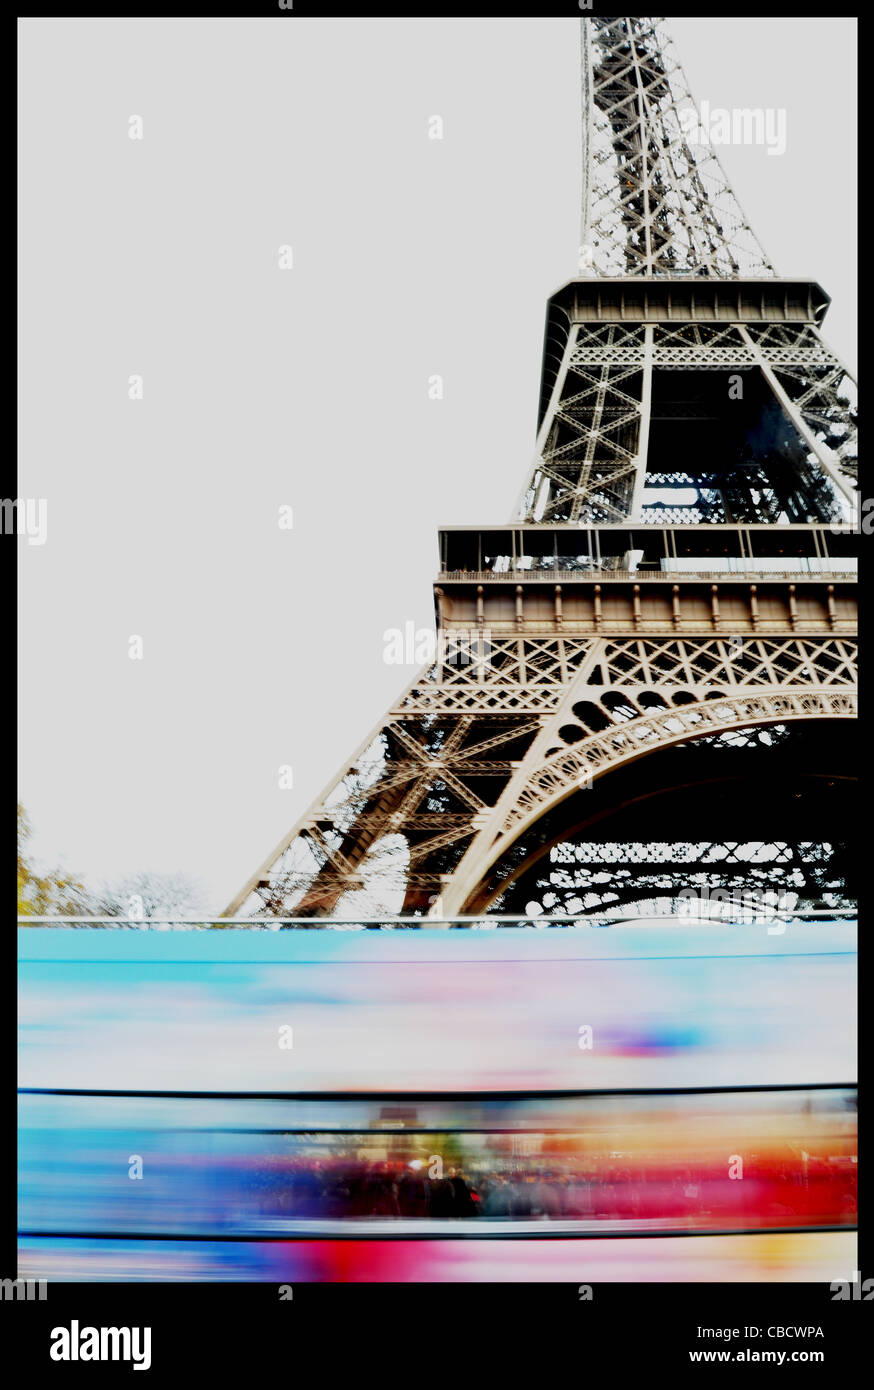 Eiffel tower with slow shutter speed Stock Photo